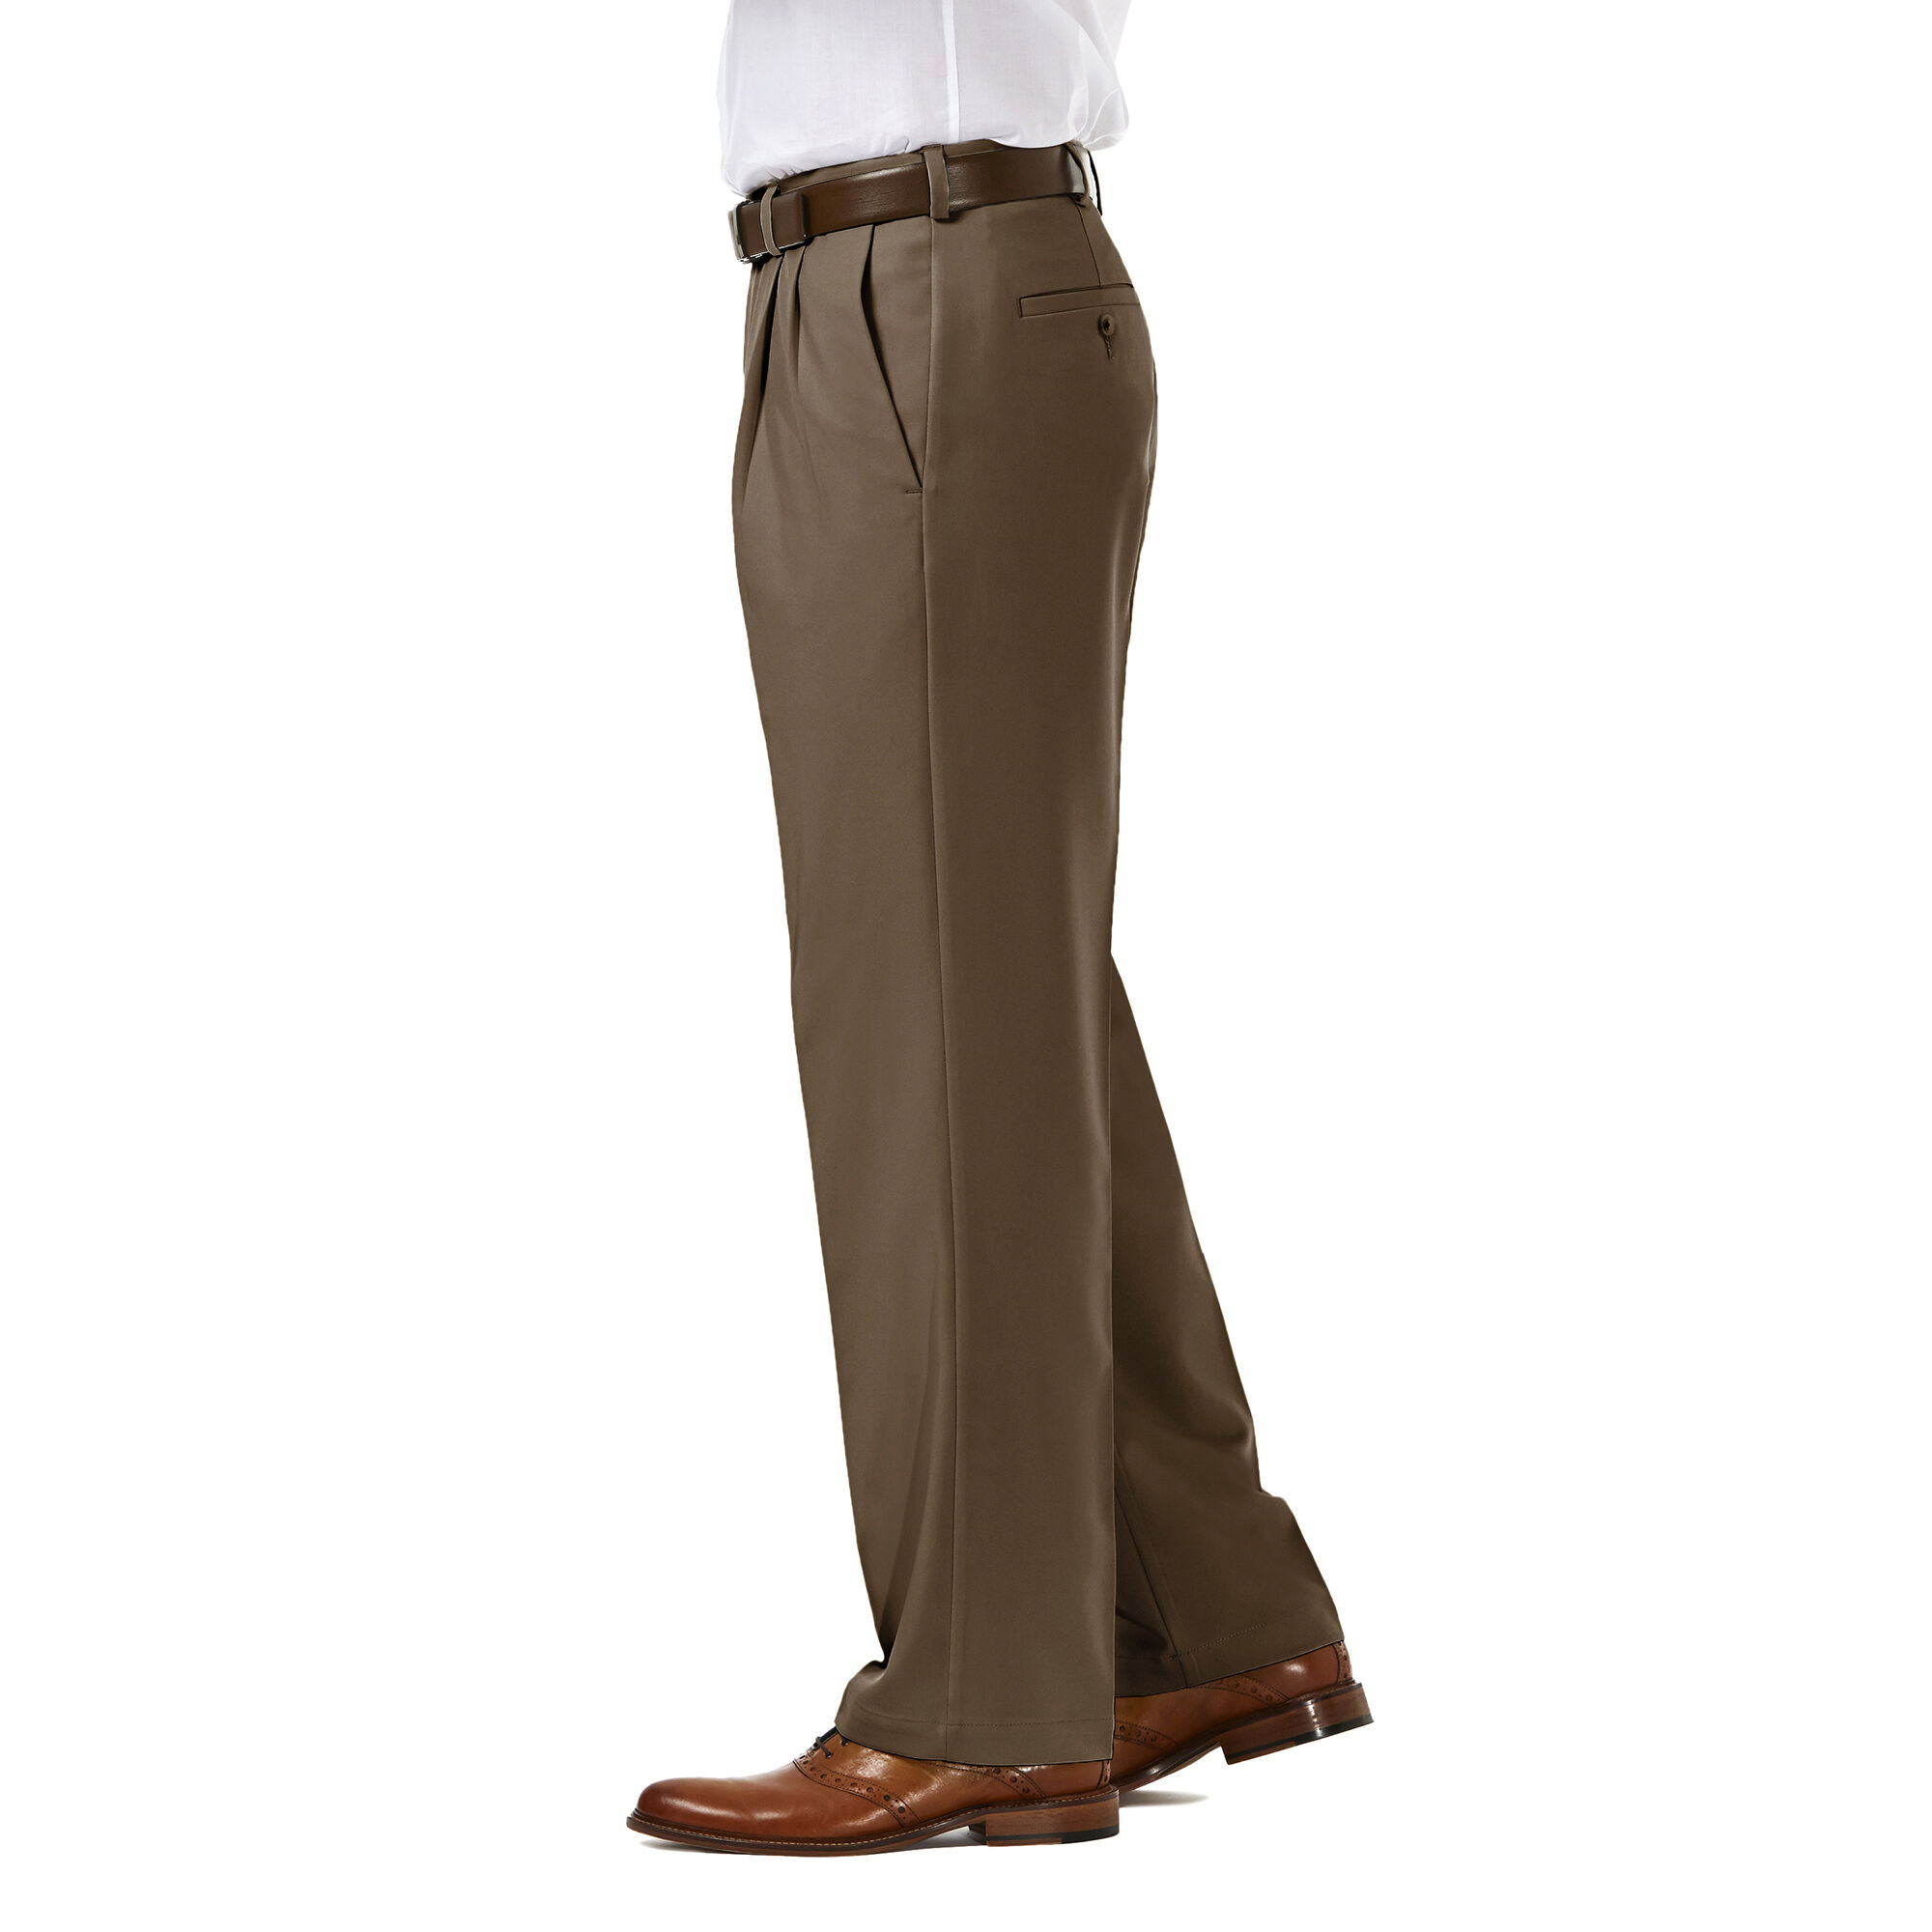 Haggar Mens Cool 18 Pro Classic Fit Pleat Front Expandable Waist Pant